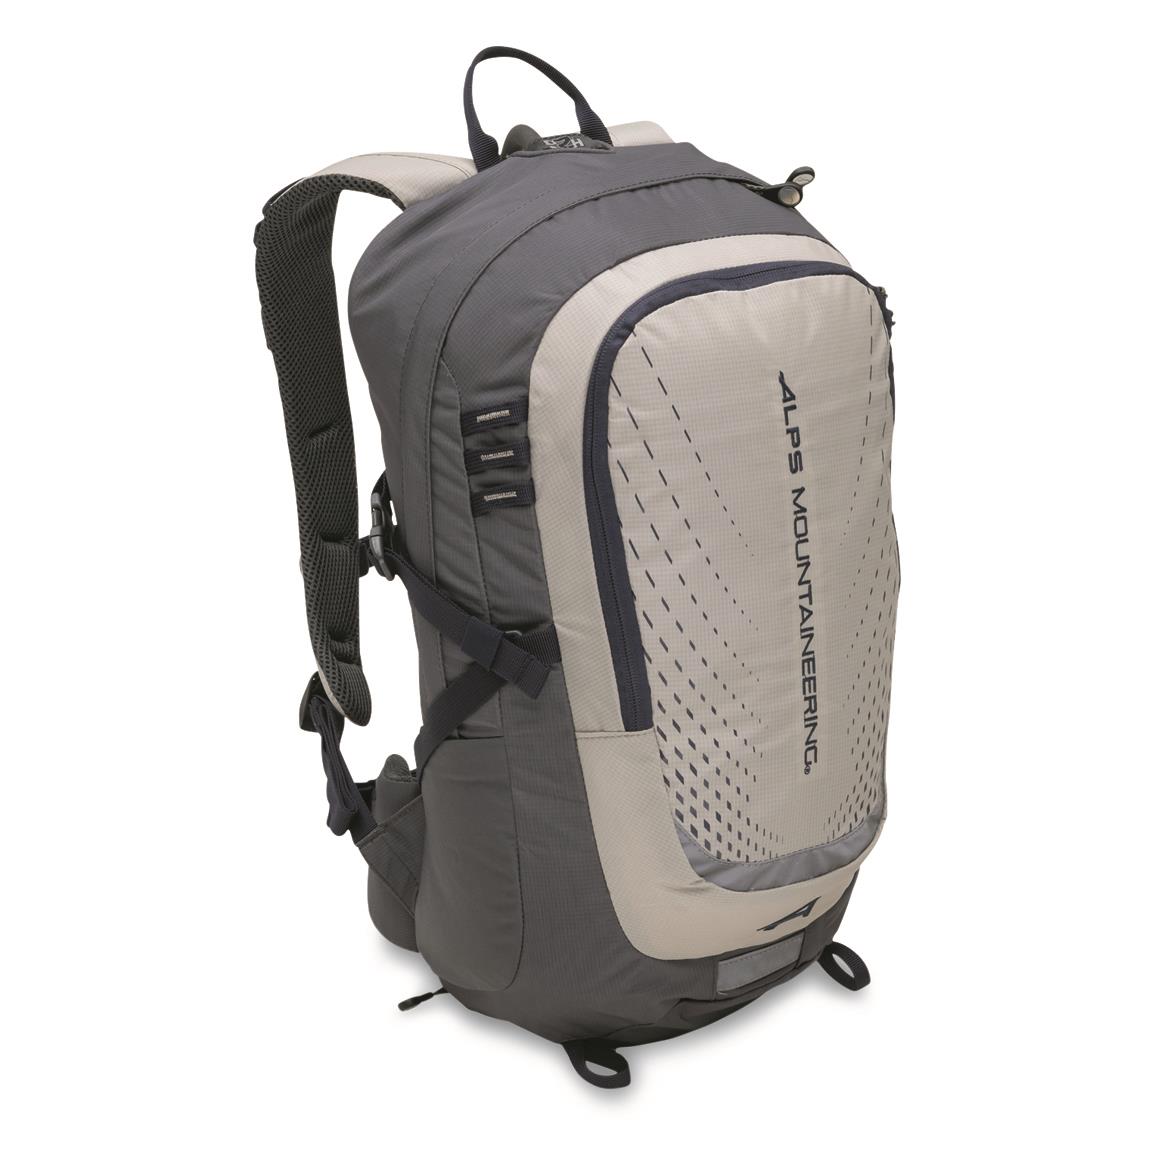 ALPS Mountaineering Hydro Trail 17 Hydration Pack, Gray/Navy